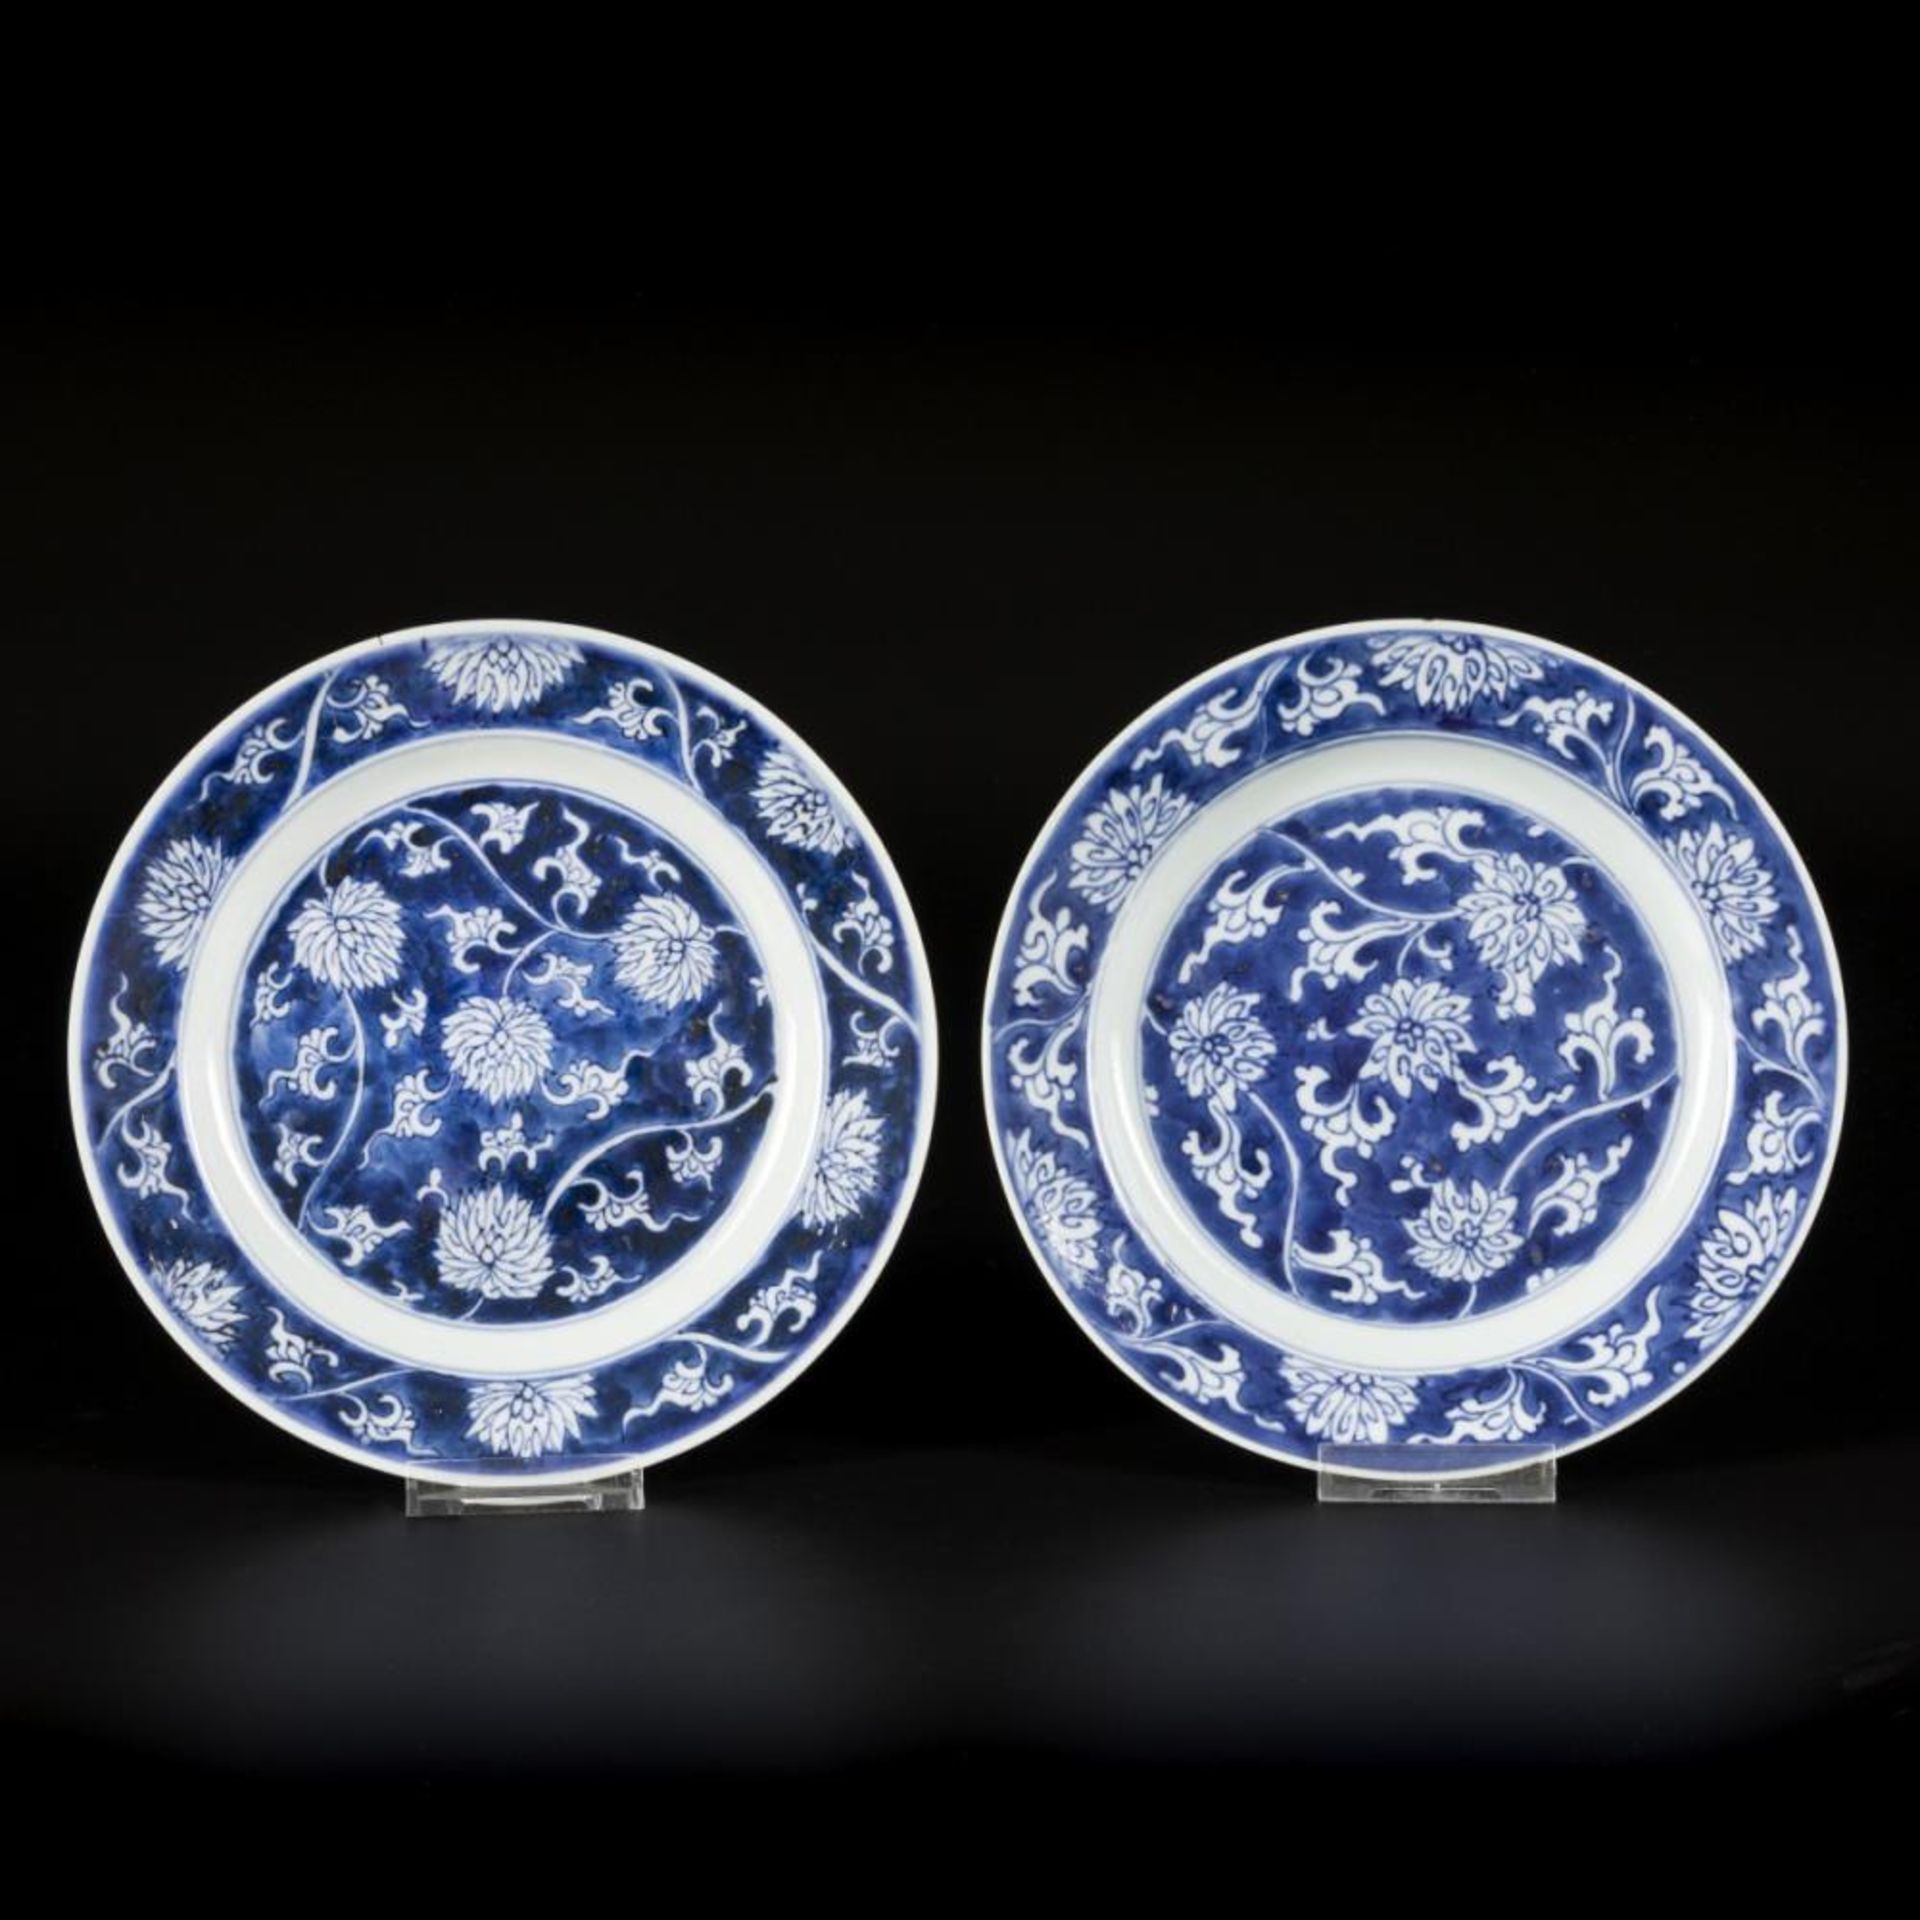 A set of (2) porcelain plates with lotus decoration in reversed technique, marked with incense burne